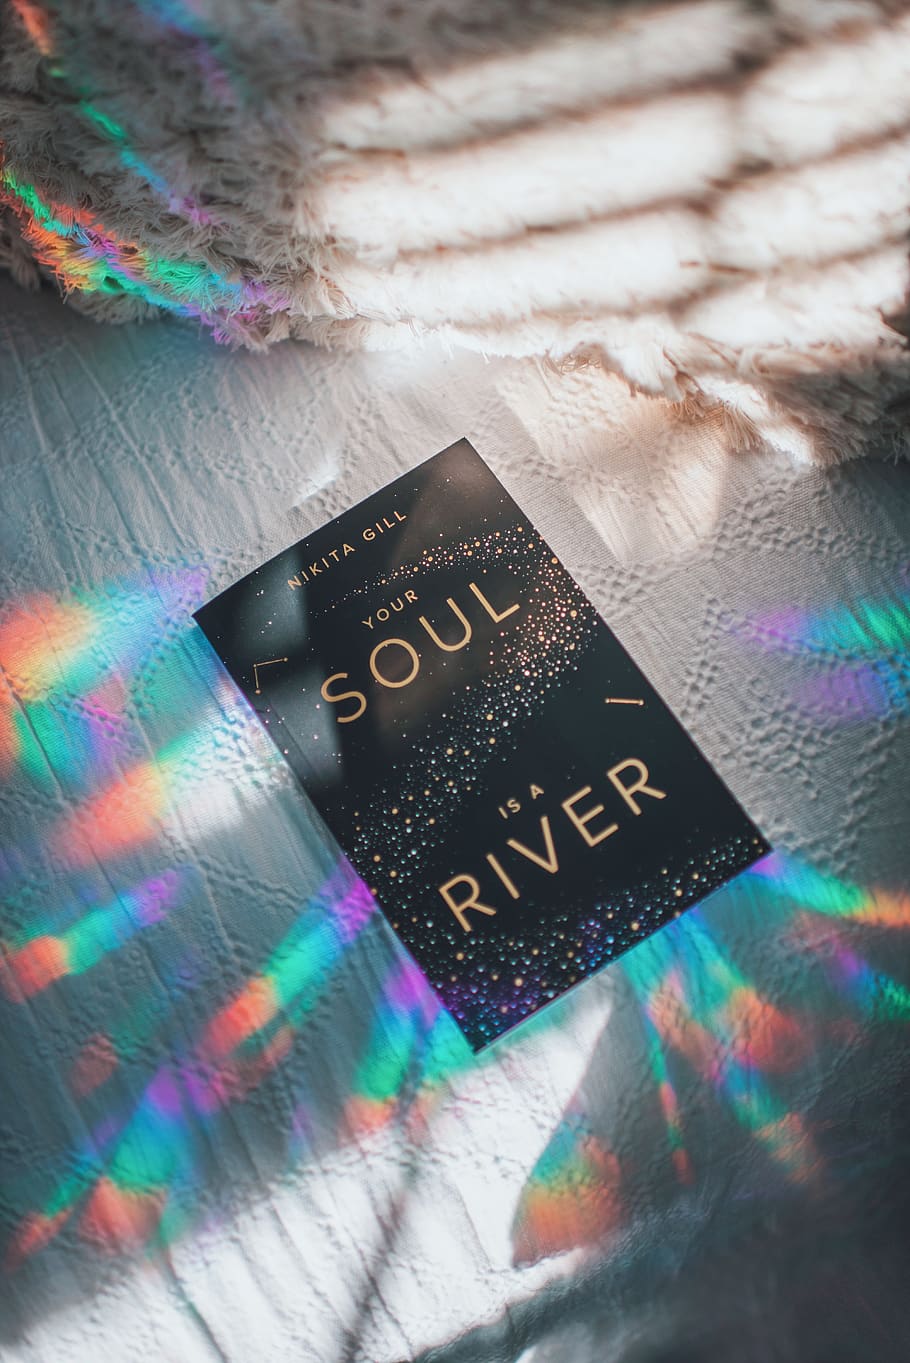 Nikita Gill Your Soul is a River book, sunlight, lights, rainbow